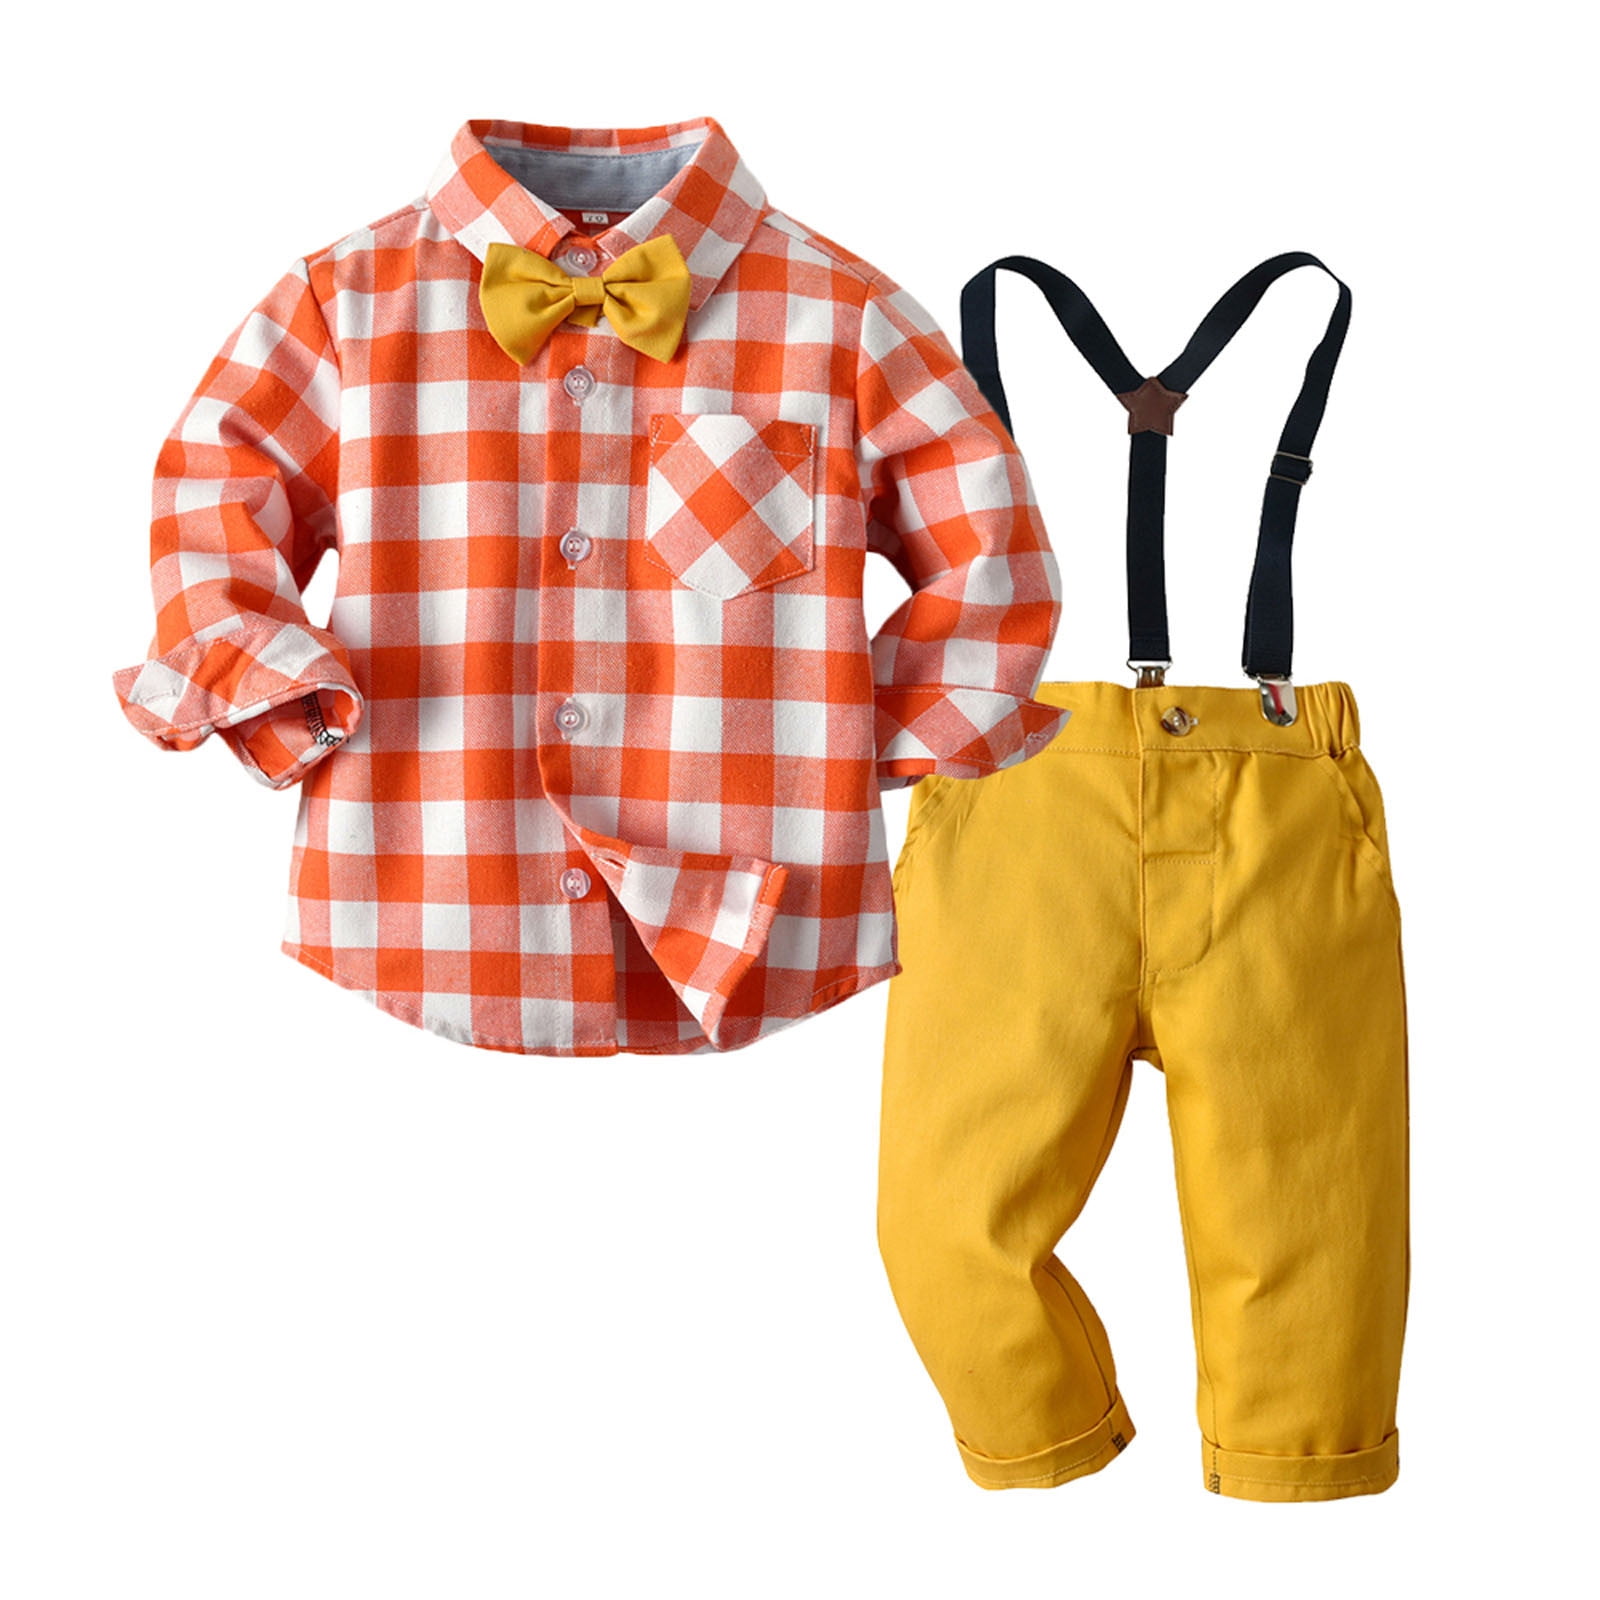 Kidshopedia | Boys dressy outfits, Kids outfits, Toddler outfits